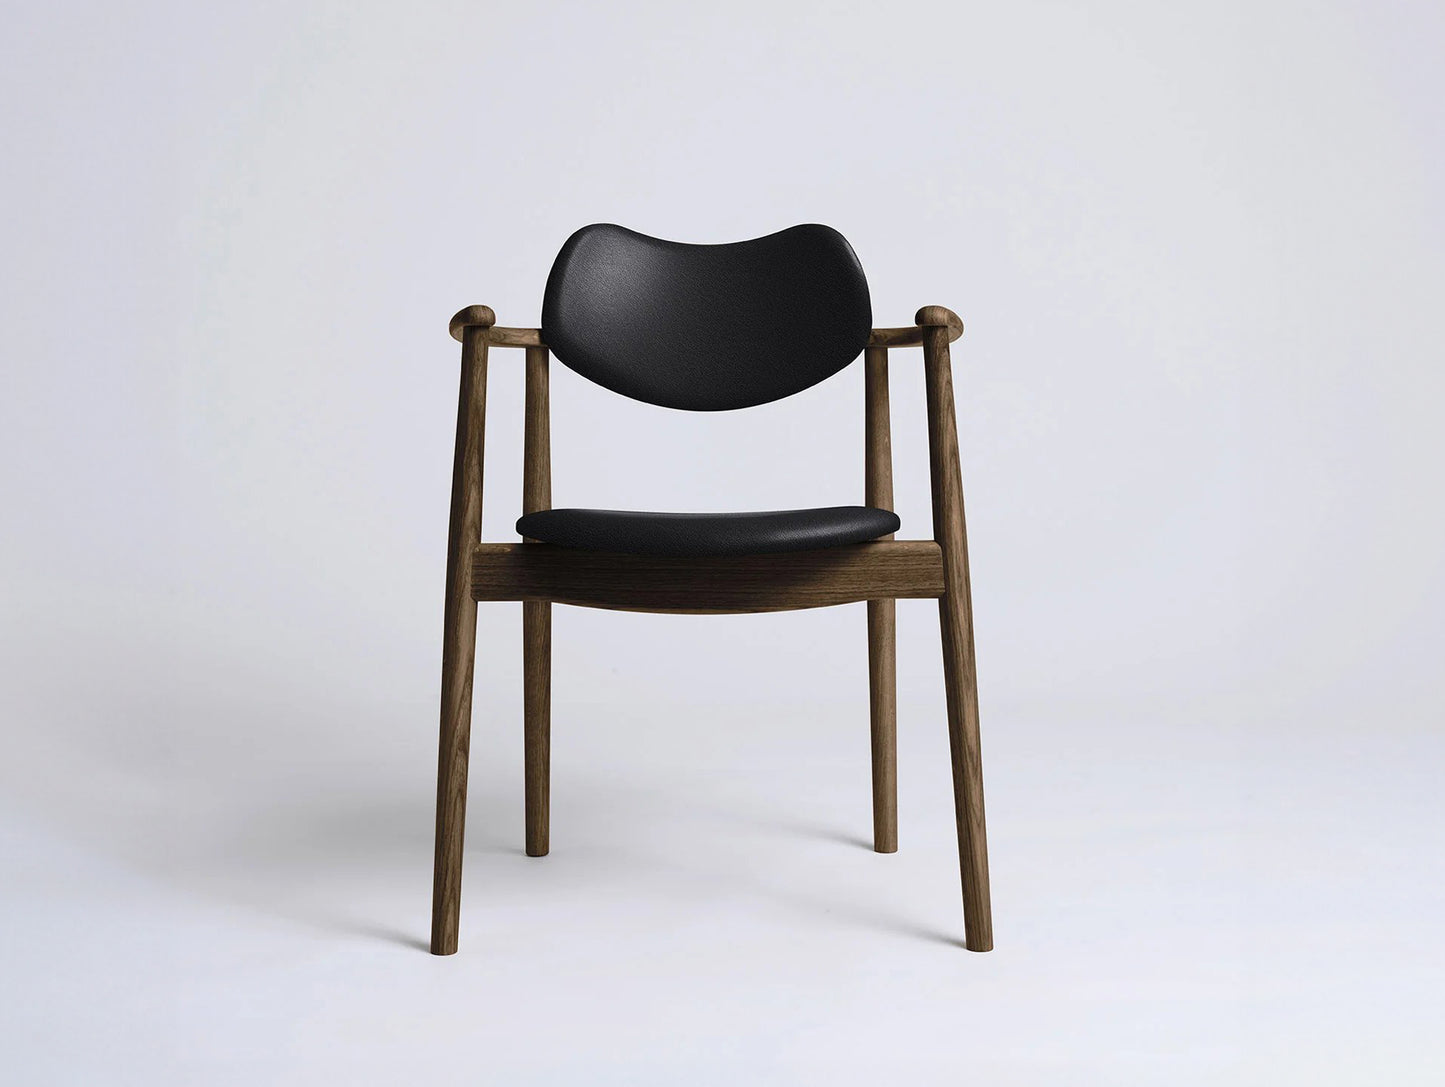 Regatta Chair Seat and Back Upholstered by Ro Collection - Smoked Oak / Standard Black Leather